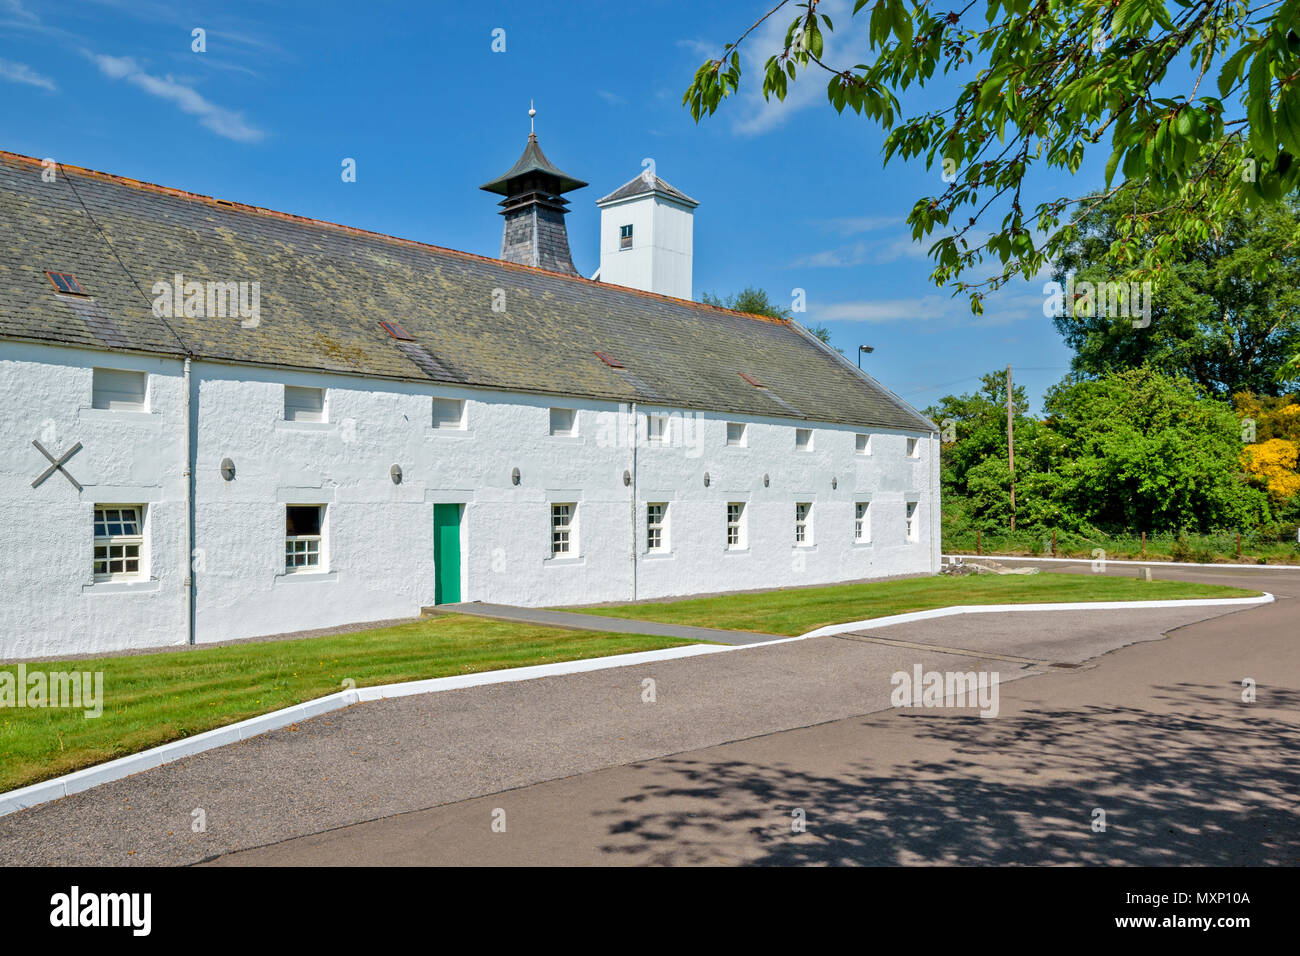 DALLAS DHU MALT WHISKY DISTILLERY FORRES SCOTLAND HISTORIC LONG WHITE OUTER BUILDINGS Stock Photo